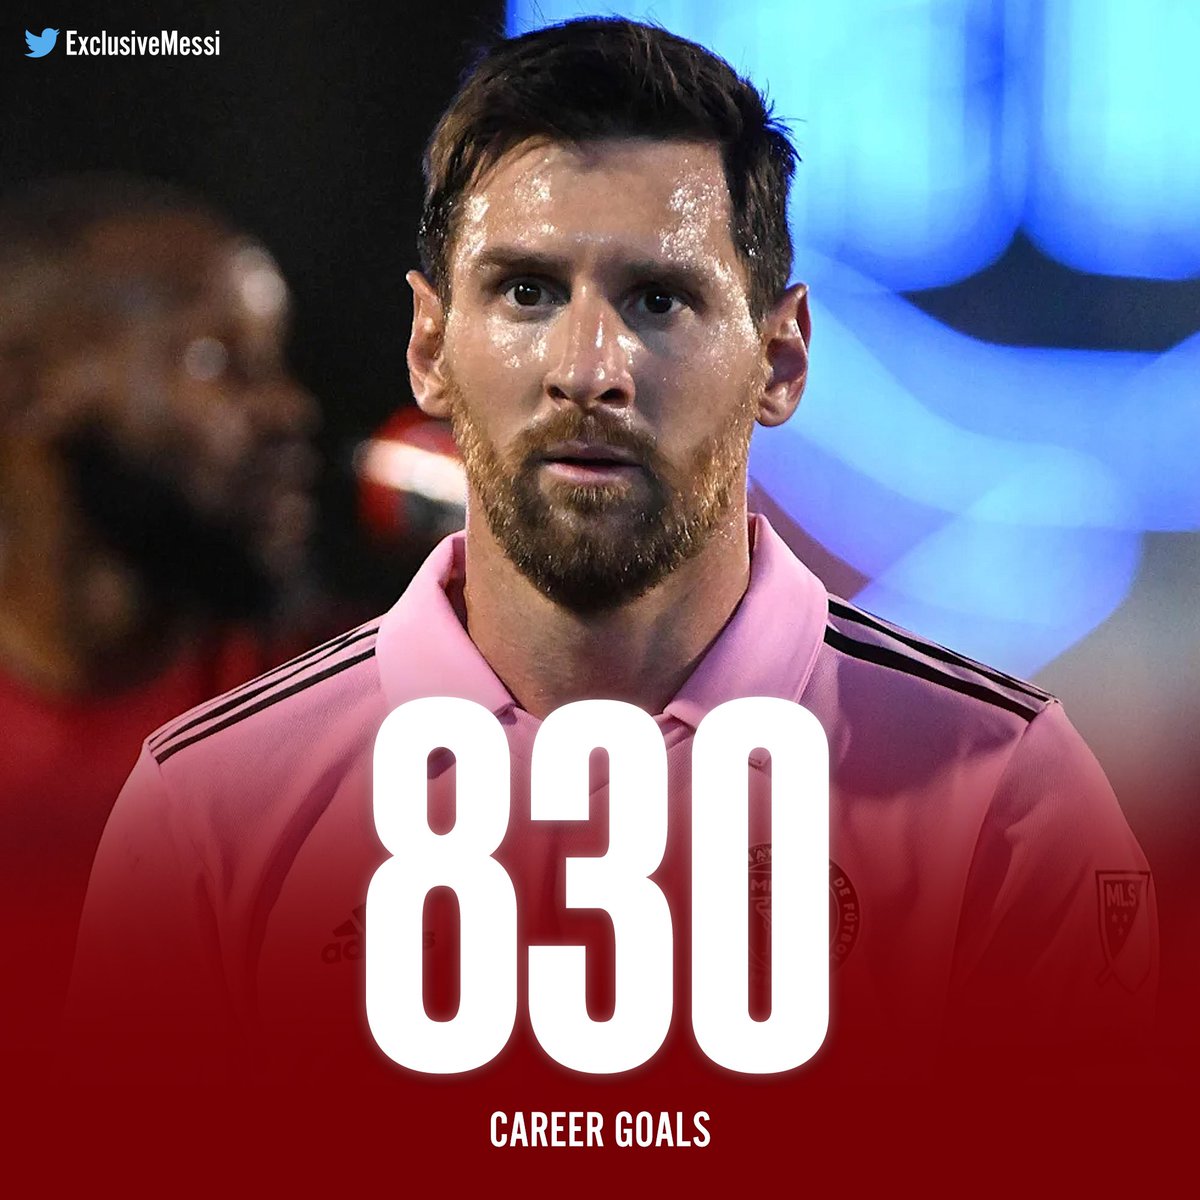 🚨 LIONEL MESSI HAS NOW SCORED 830 CAREER GOALS!! THIS MAN IS ONLY 36 YEARS OLD 🤯